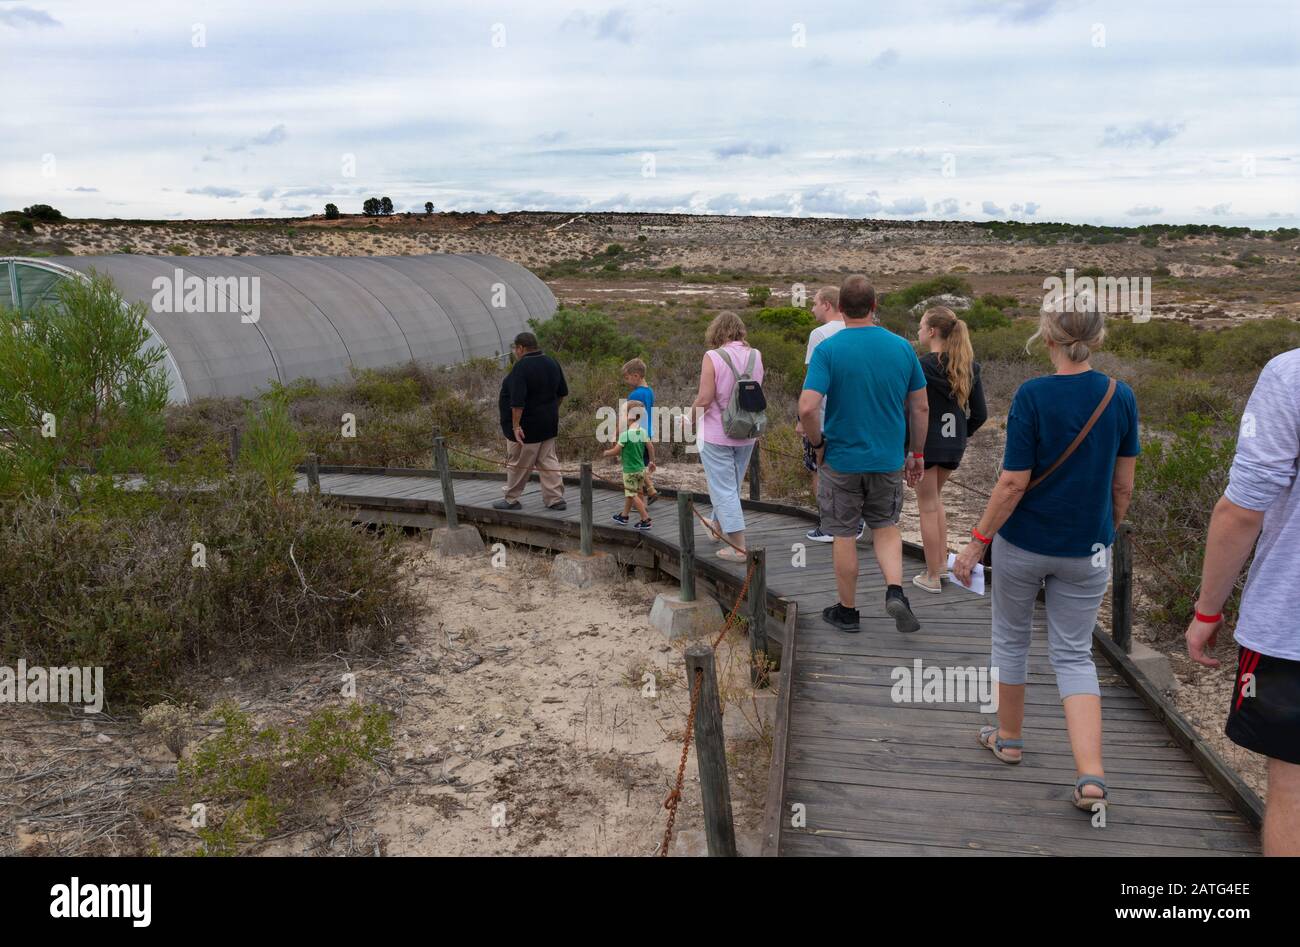 Visitors walking to the covered area to view prehistoric fossils at the West Coast Fossil Park, Langebaanweg, Western Cape, South Africa Stock Photo